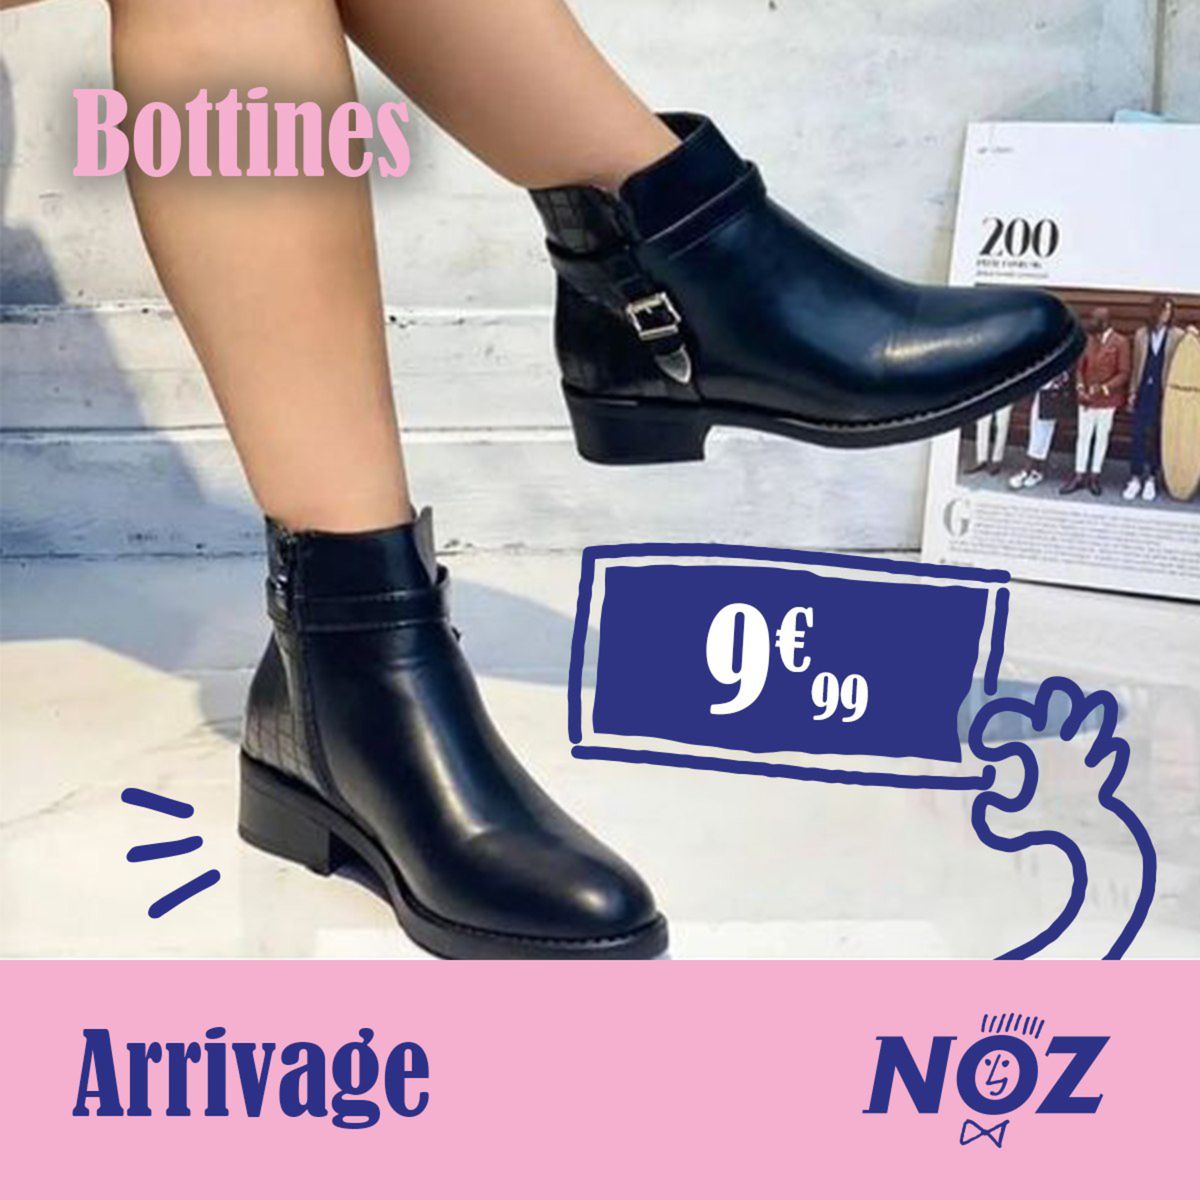 Catalogue ARRIVAGE Bottines, page 00001